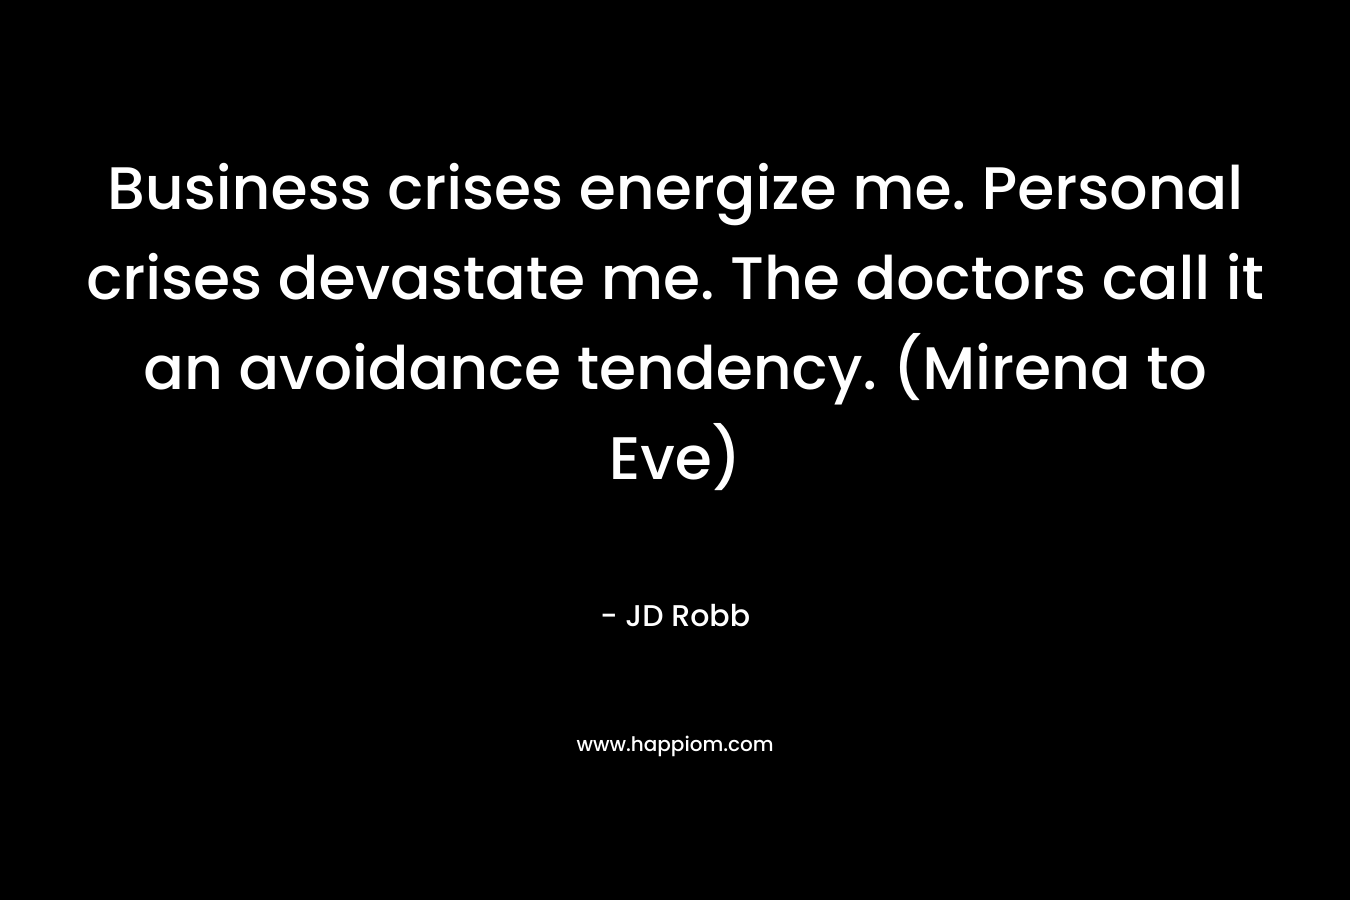 Business crises energize me. Personal crises devastate me. The doctors call it an avoidance tendency. (Mirena to Eve) – JD Robb